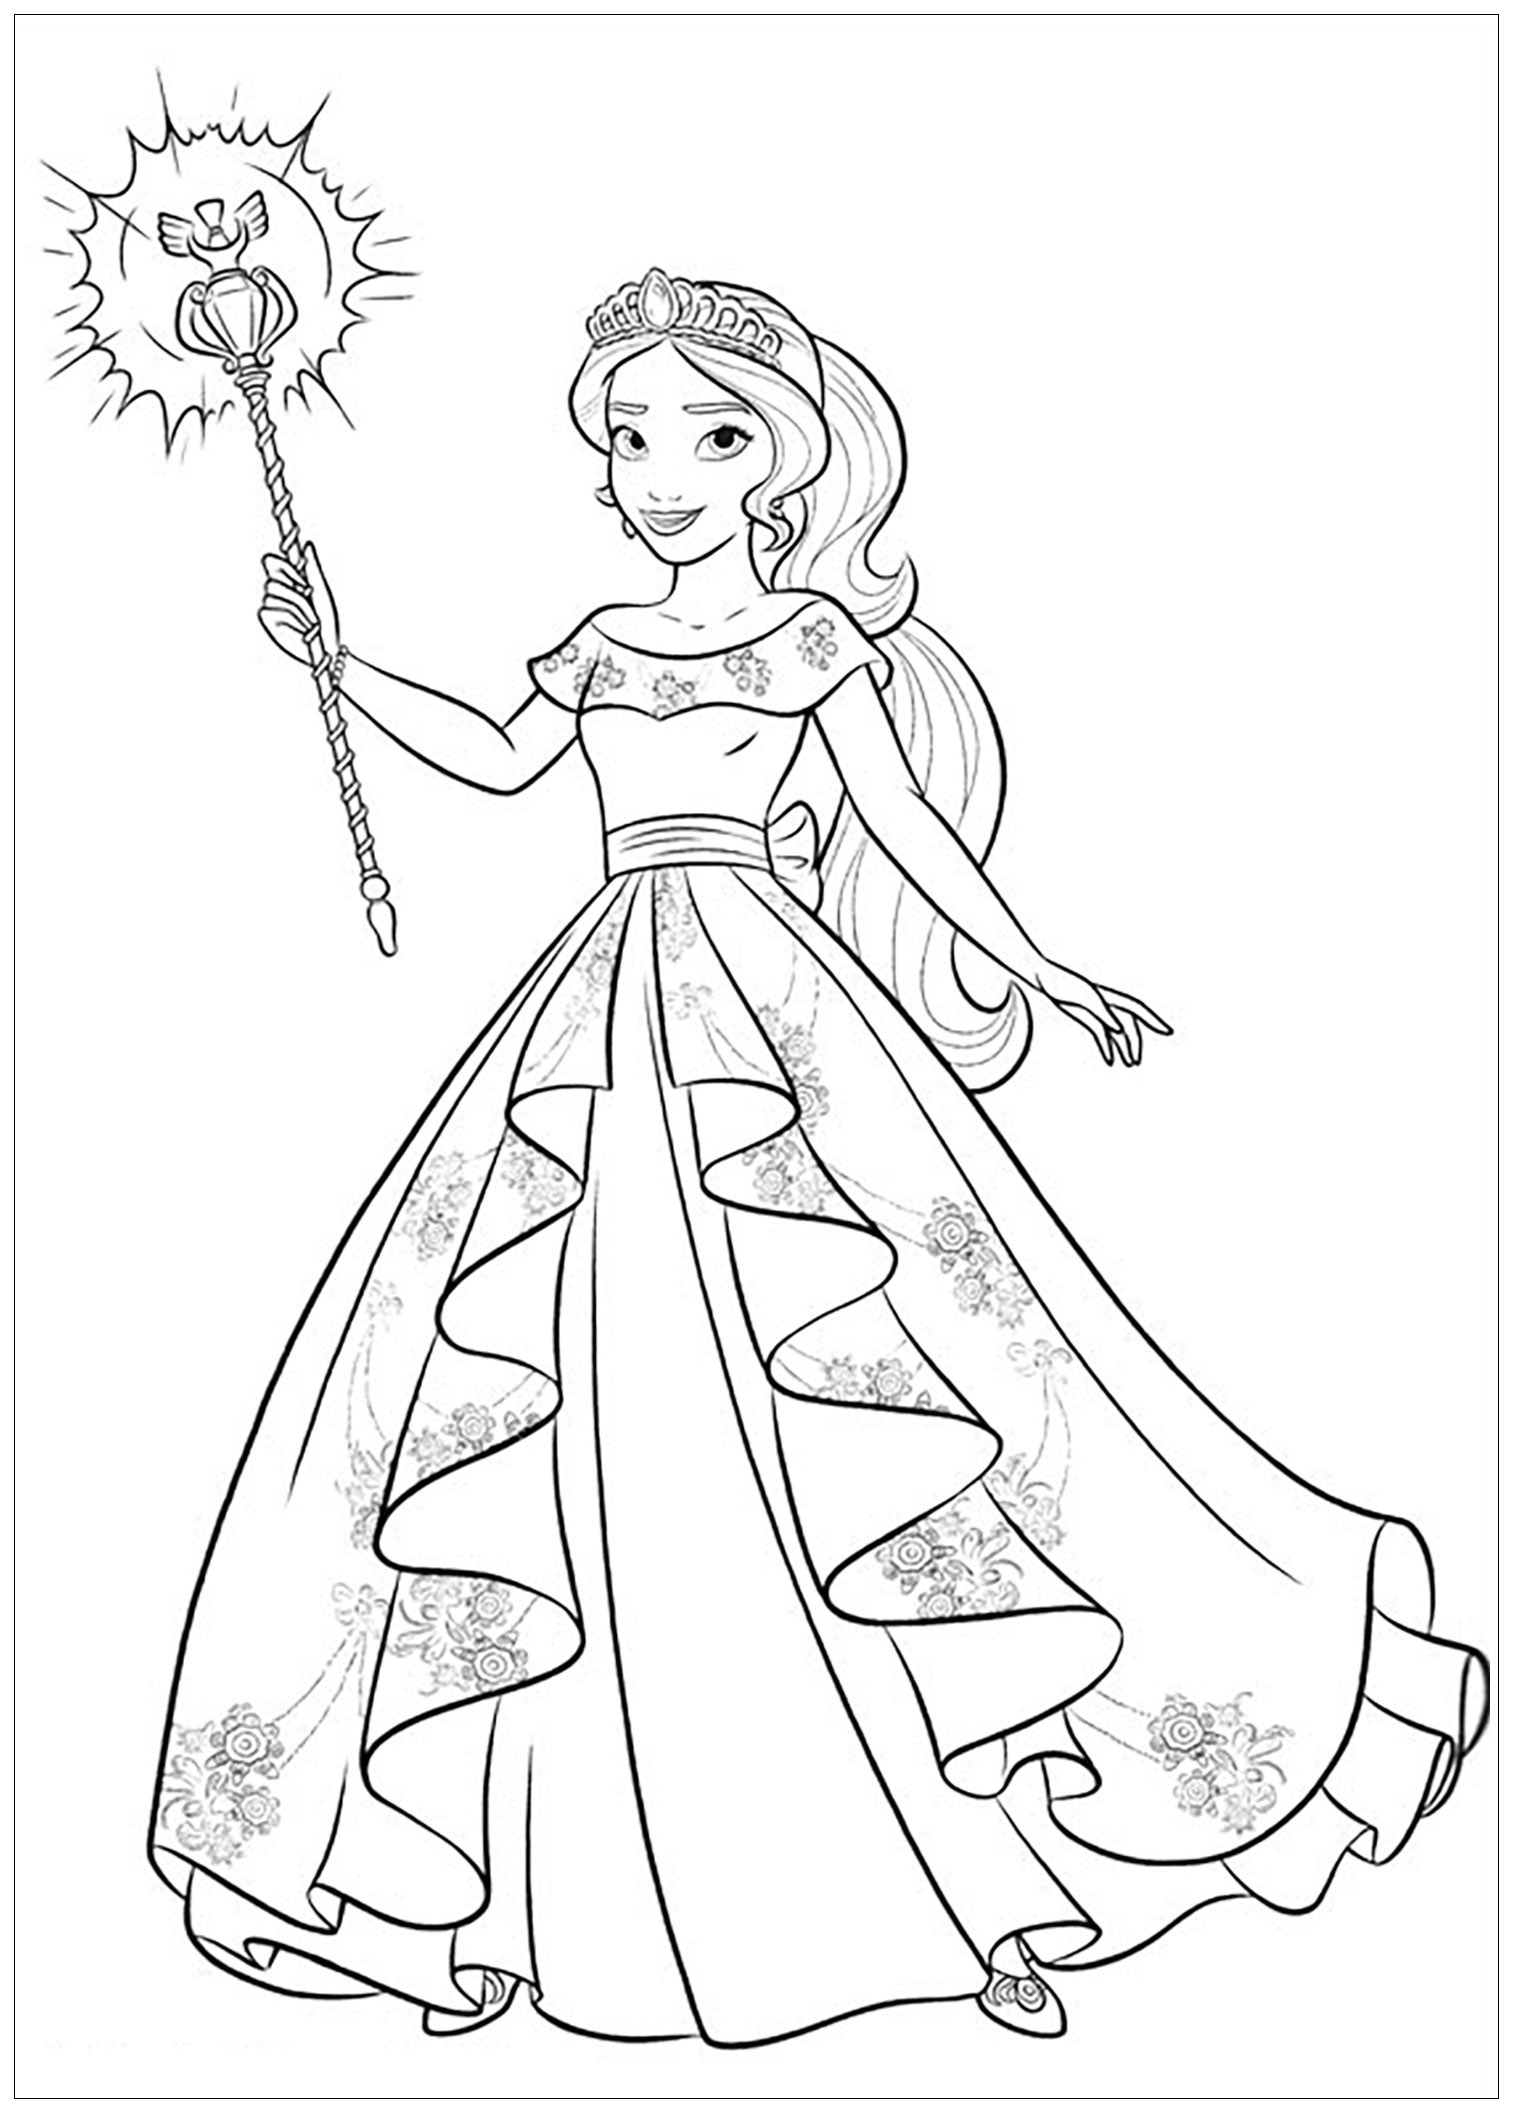 Elena avalor to download - Elena Avalor Kids Coloring Pages